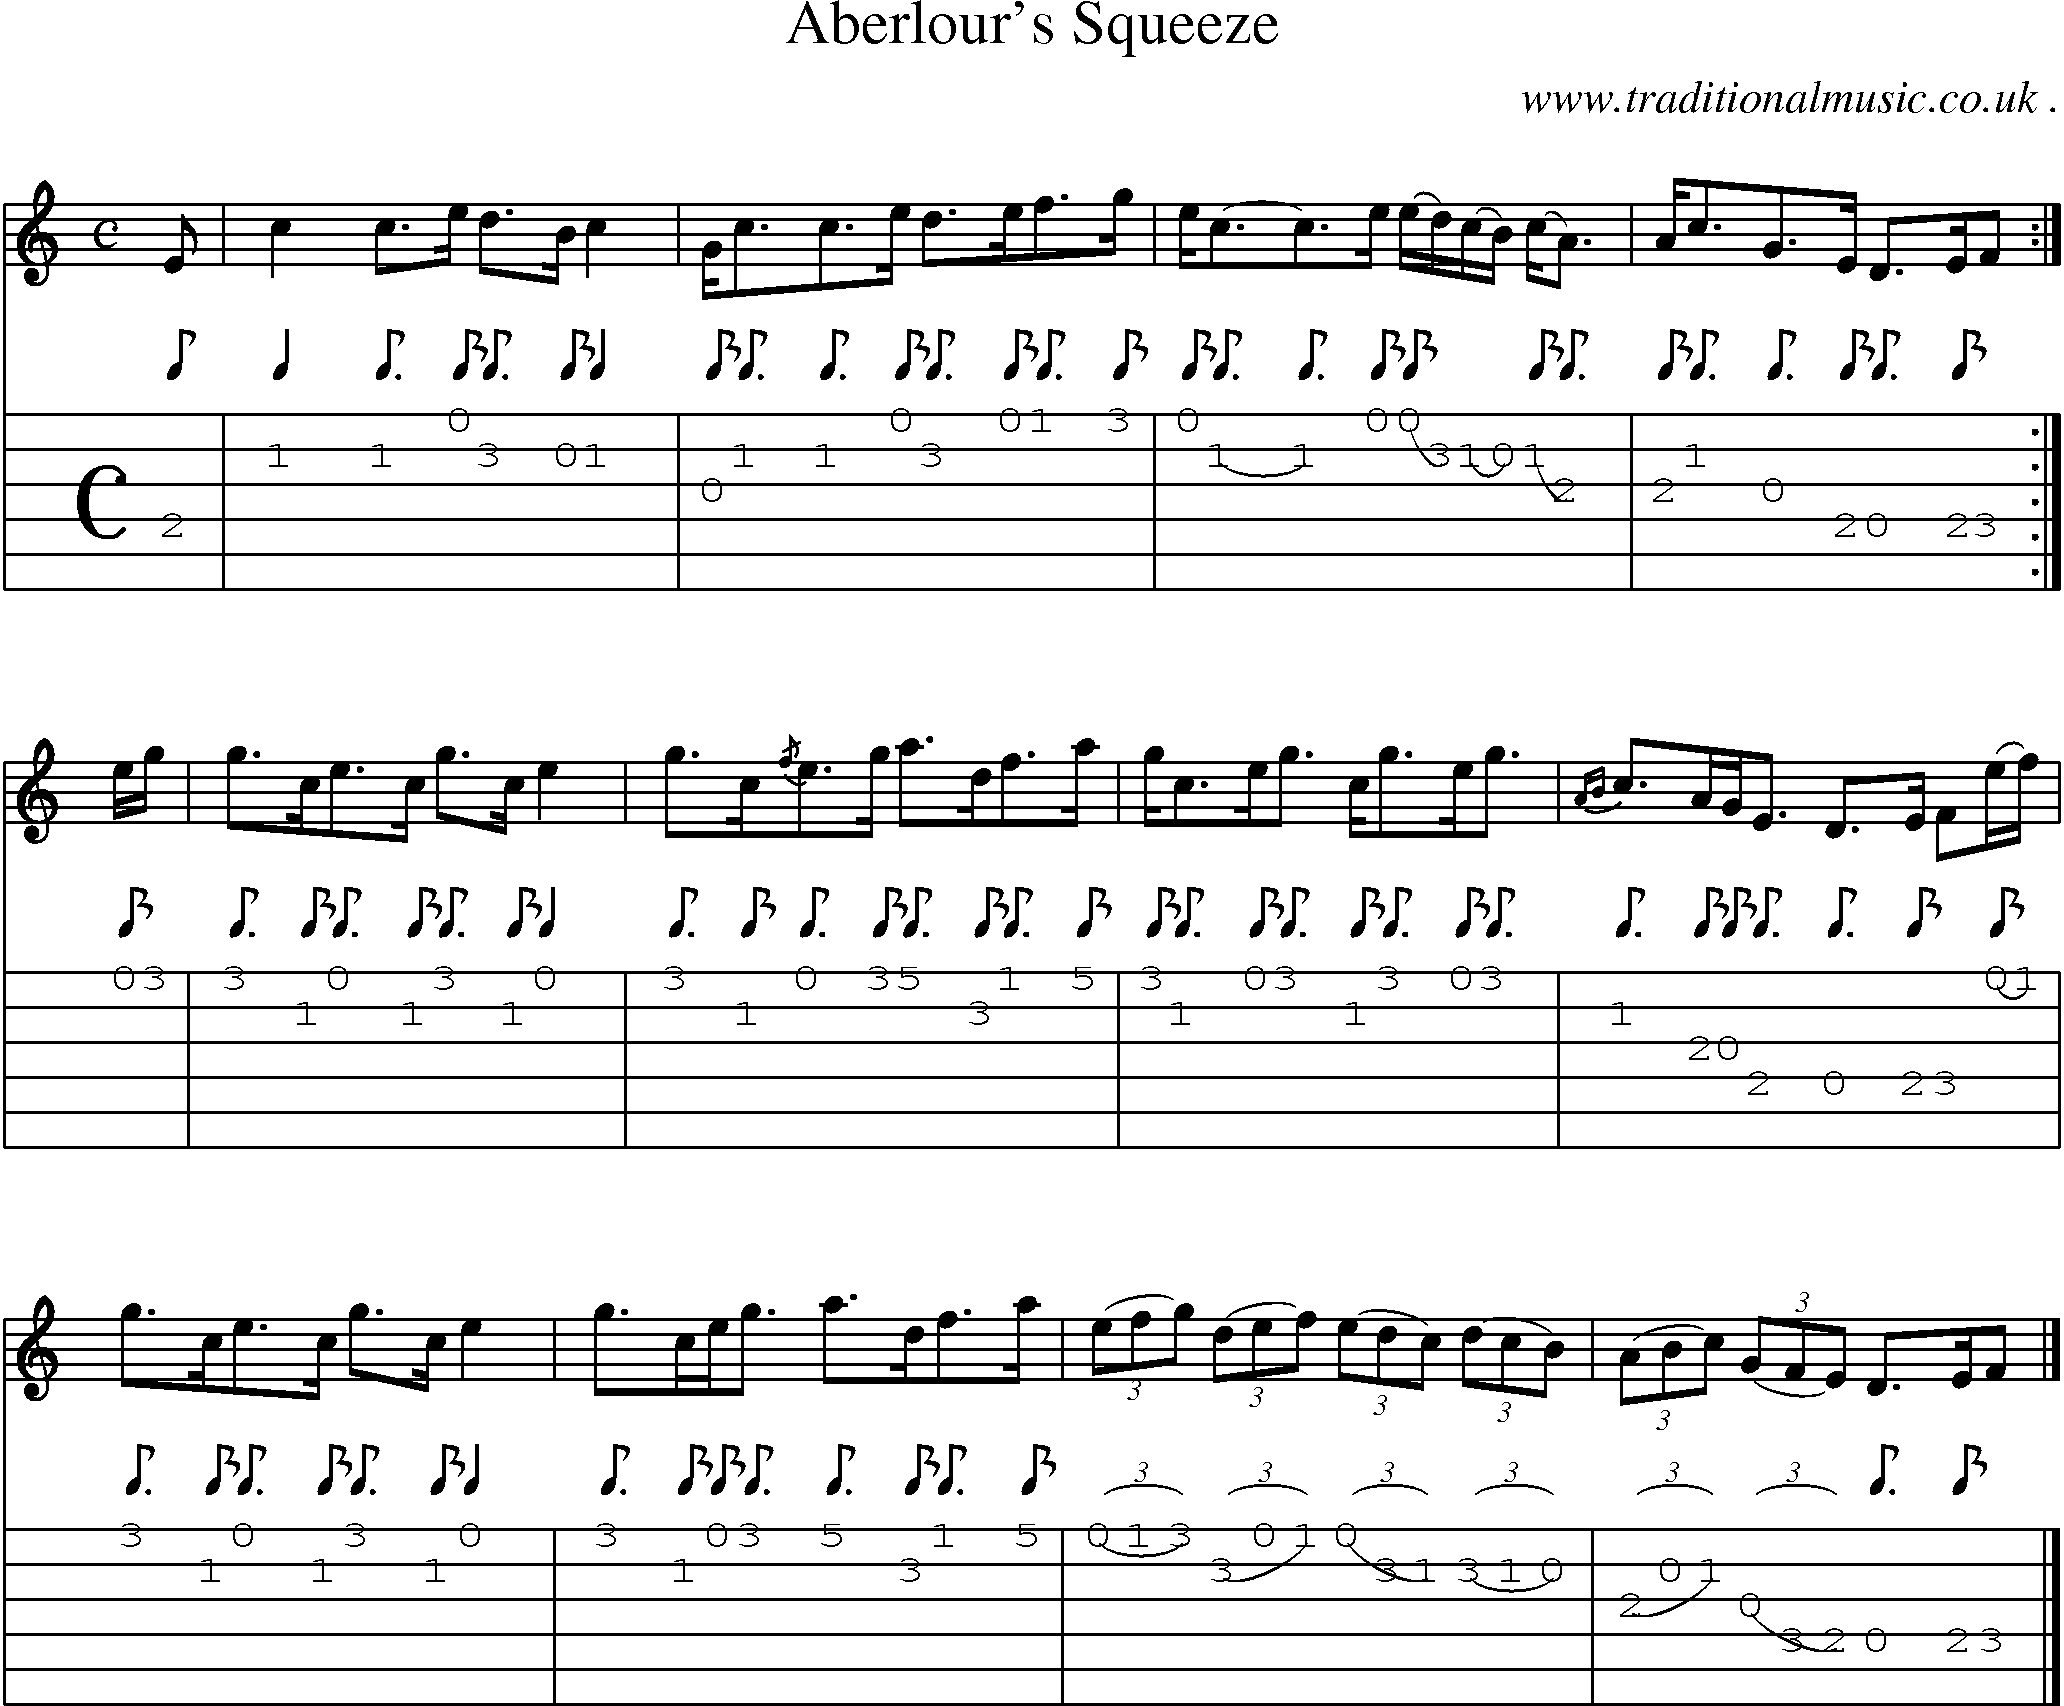 Sheet-music  score, Chords and Guitar Tabs for Aberlours Squeeze